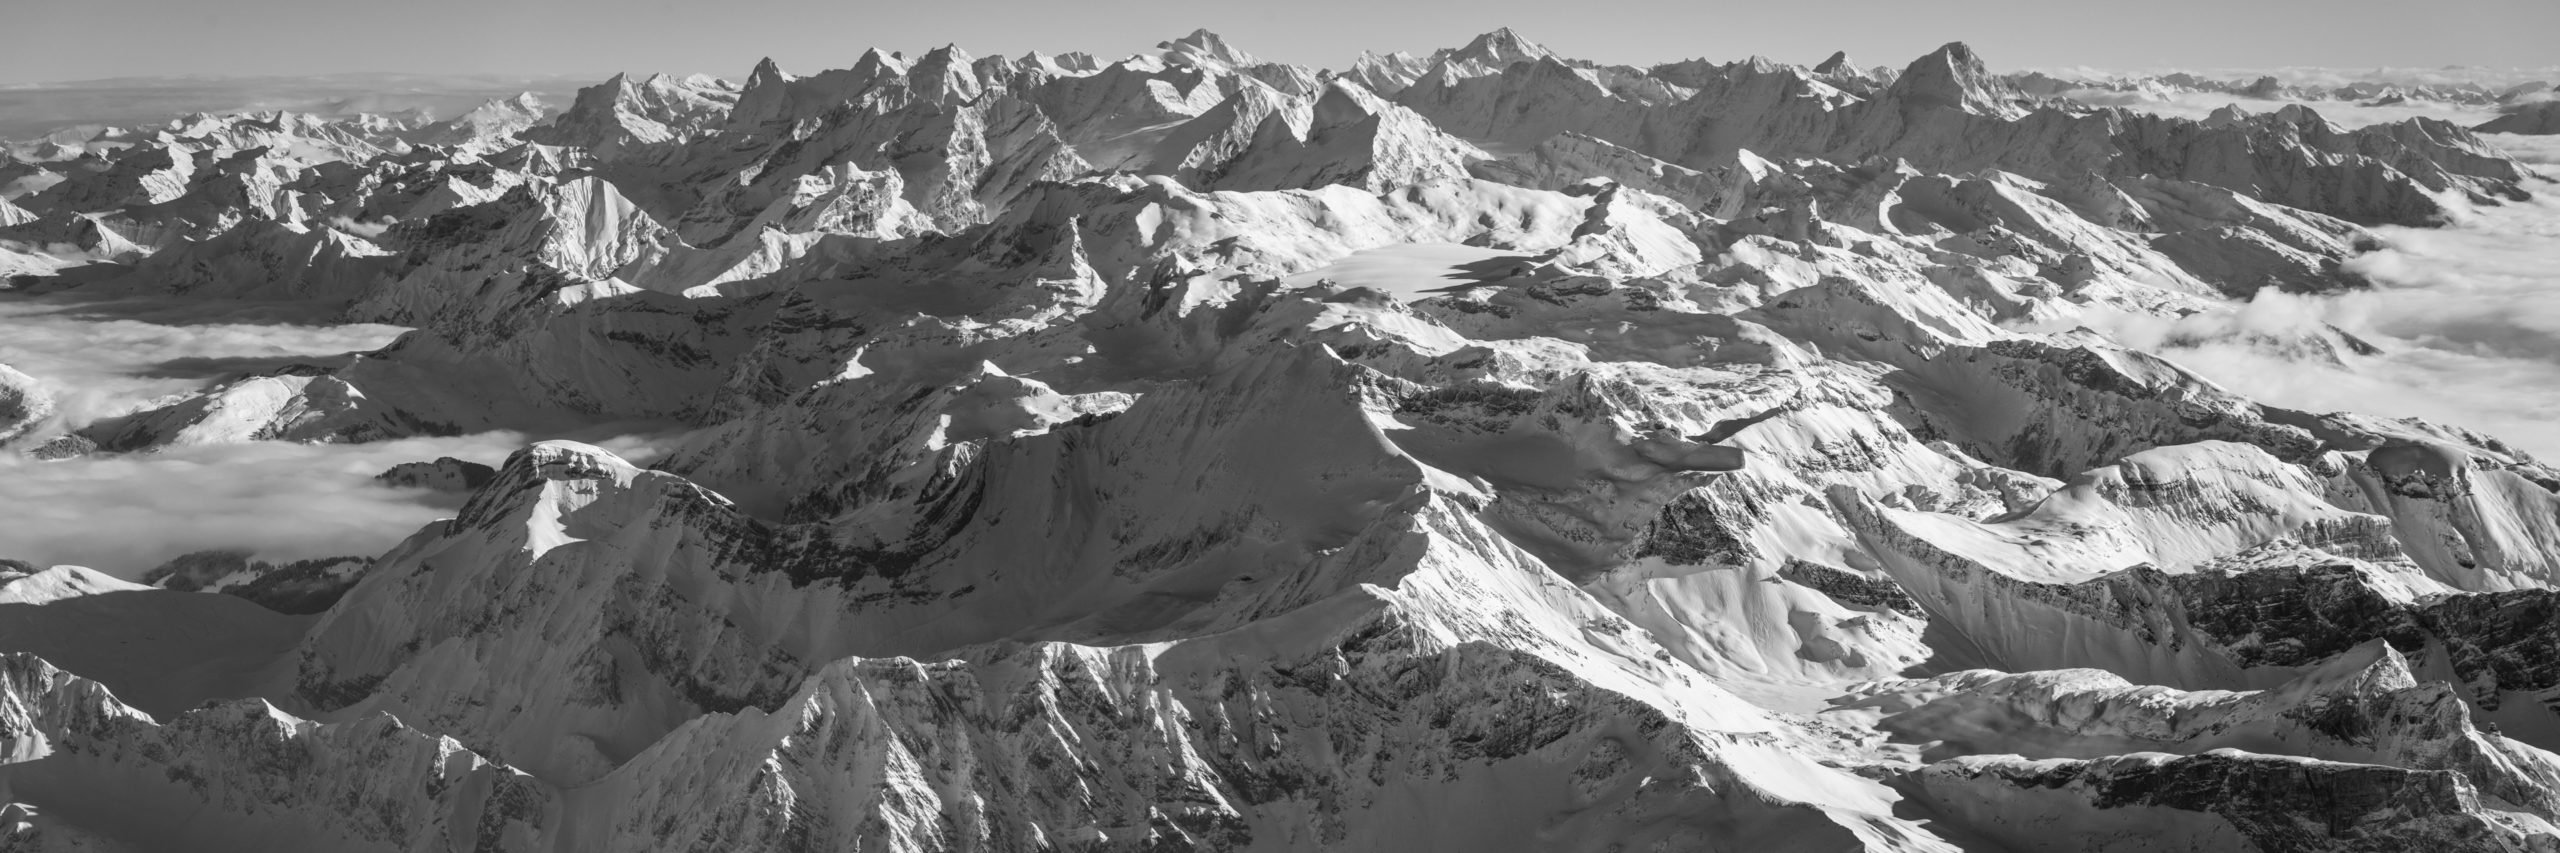 Panoramic photo of bernese alps - View from Les Diablerets (Glacier 3000) on bernese alps - Black and white photo of the Northern Alps